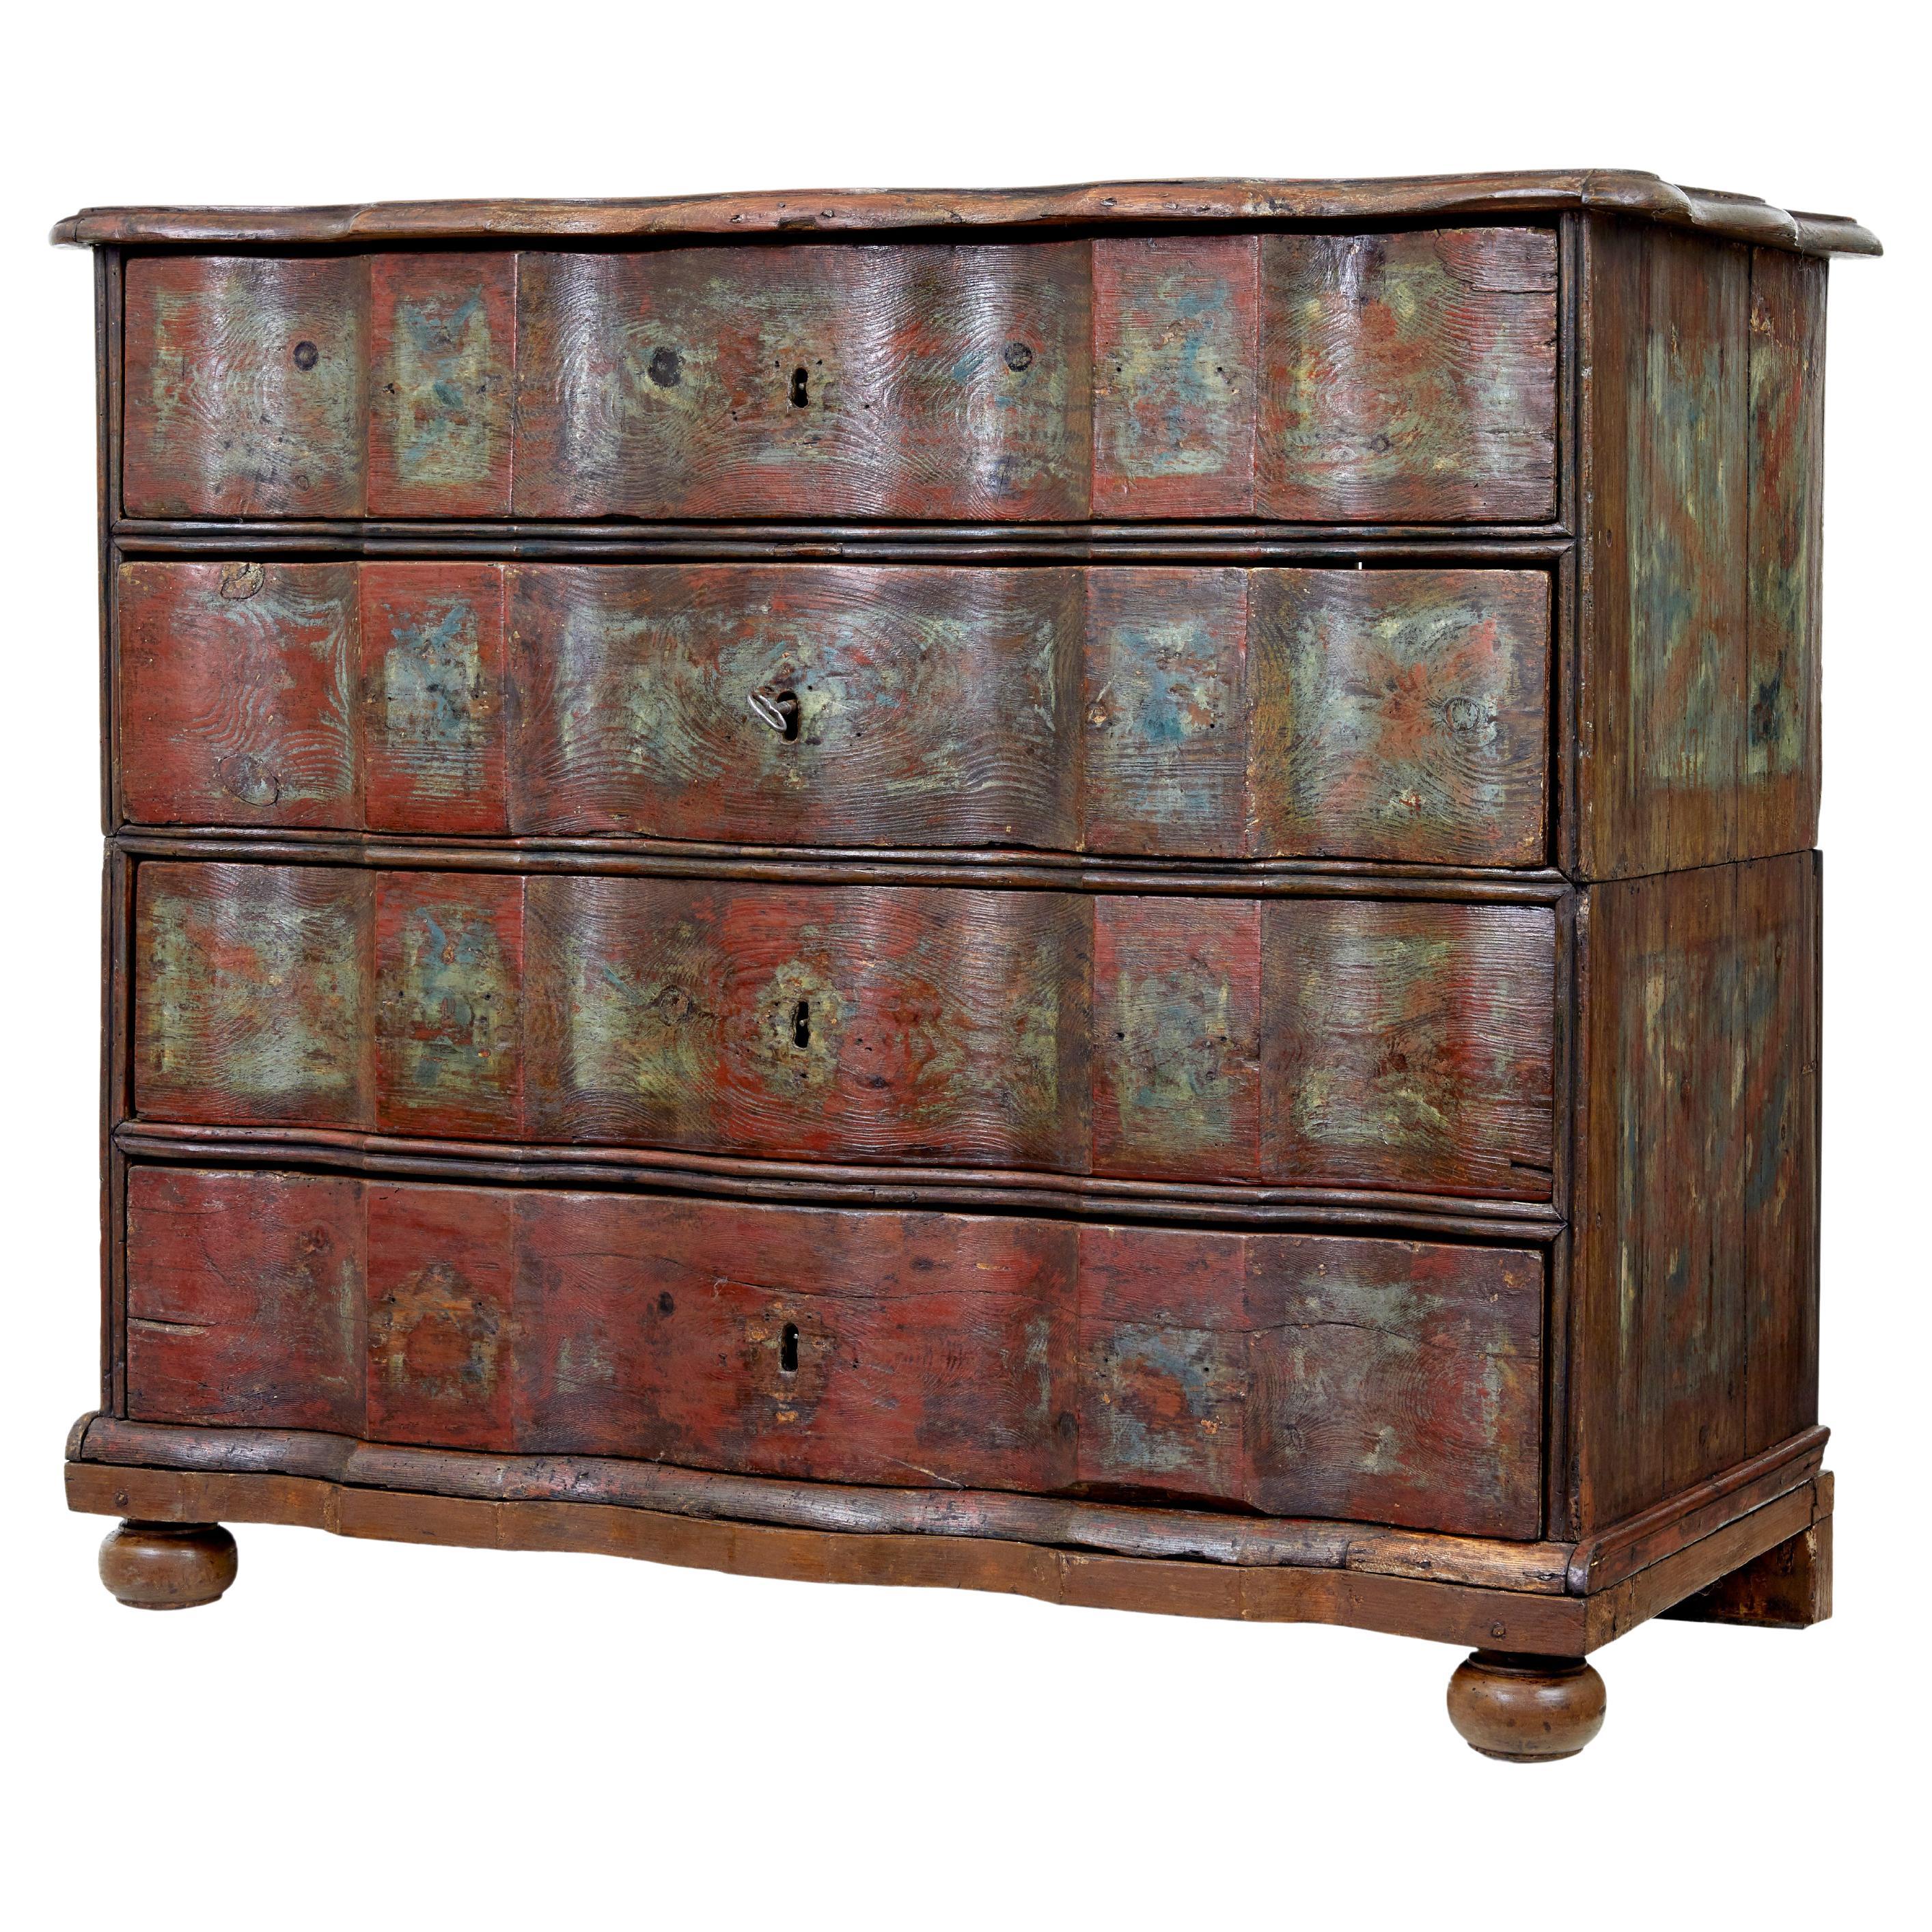 Mid 18th century Danish pine painted chest of drawers For Sale